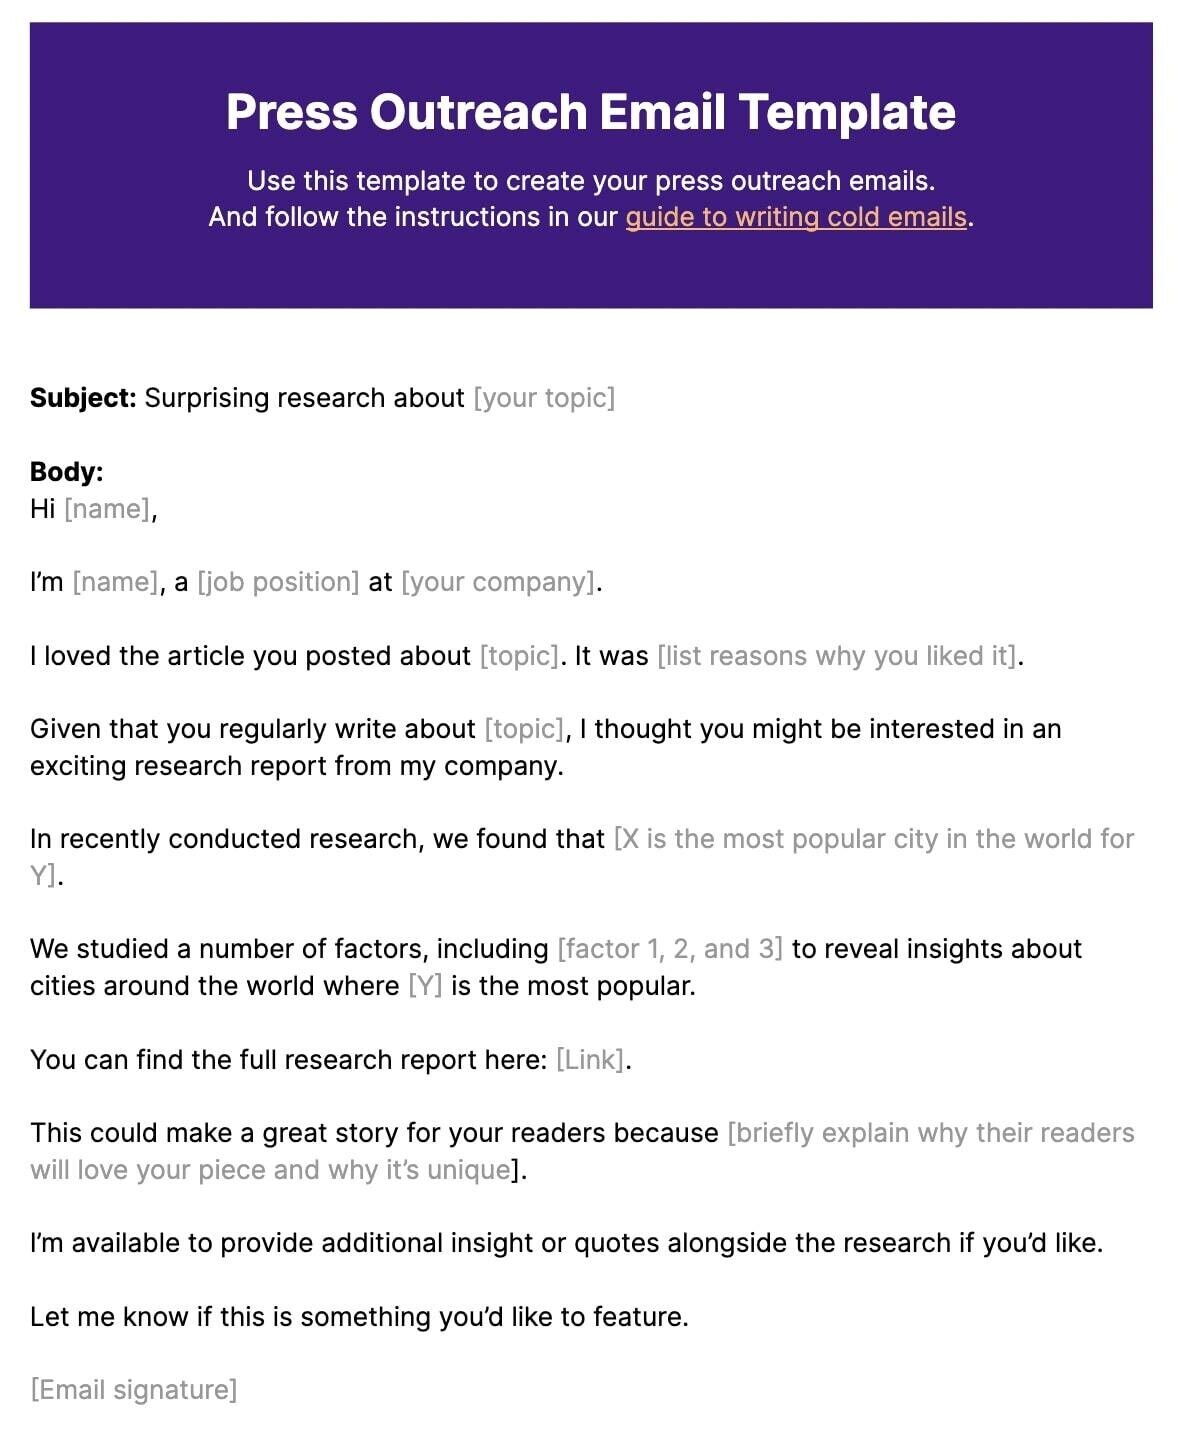 Press Outreach Email Template